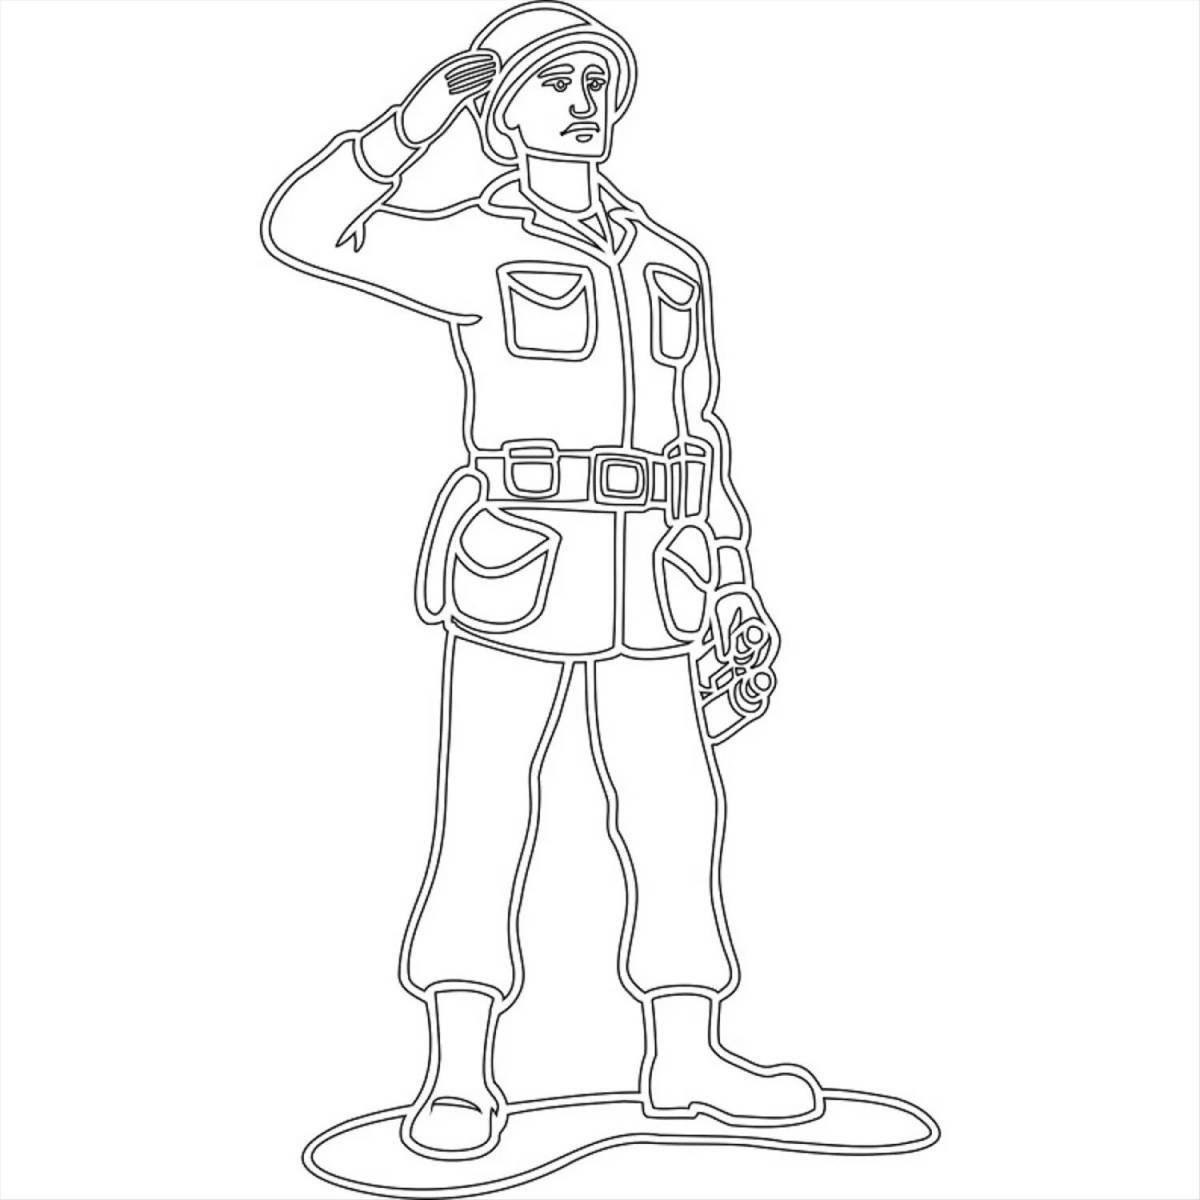 A fascinating coloring book of the military profession for children 4-5 years old